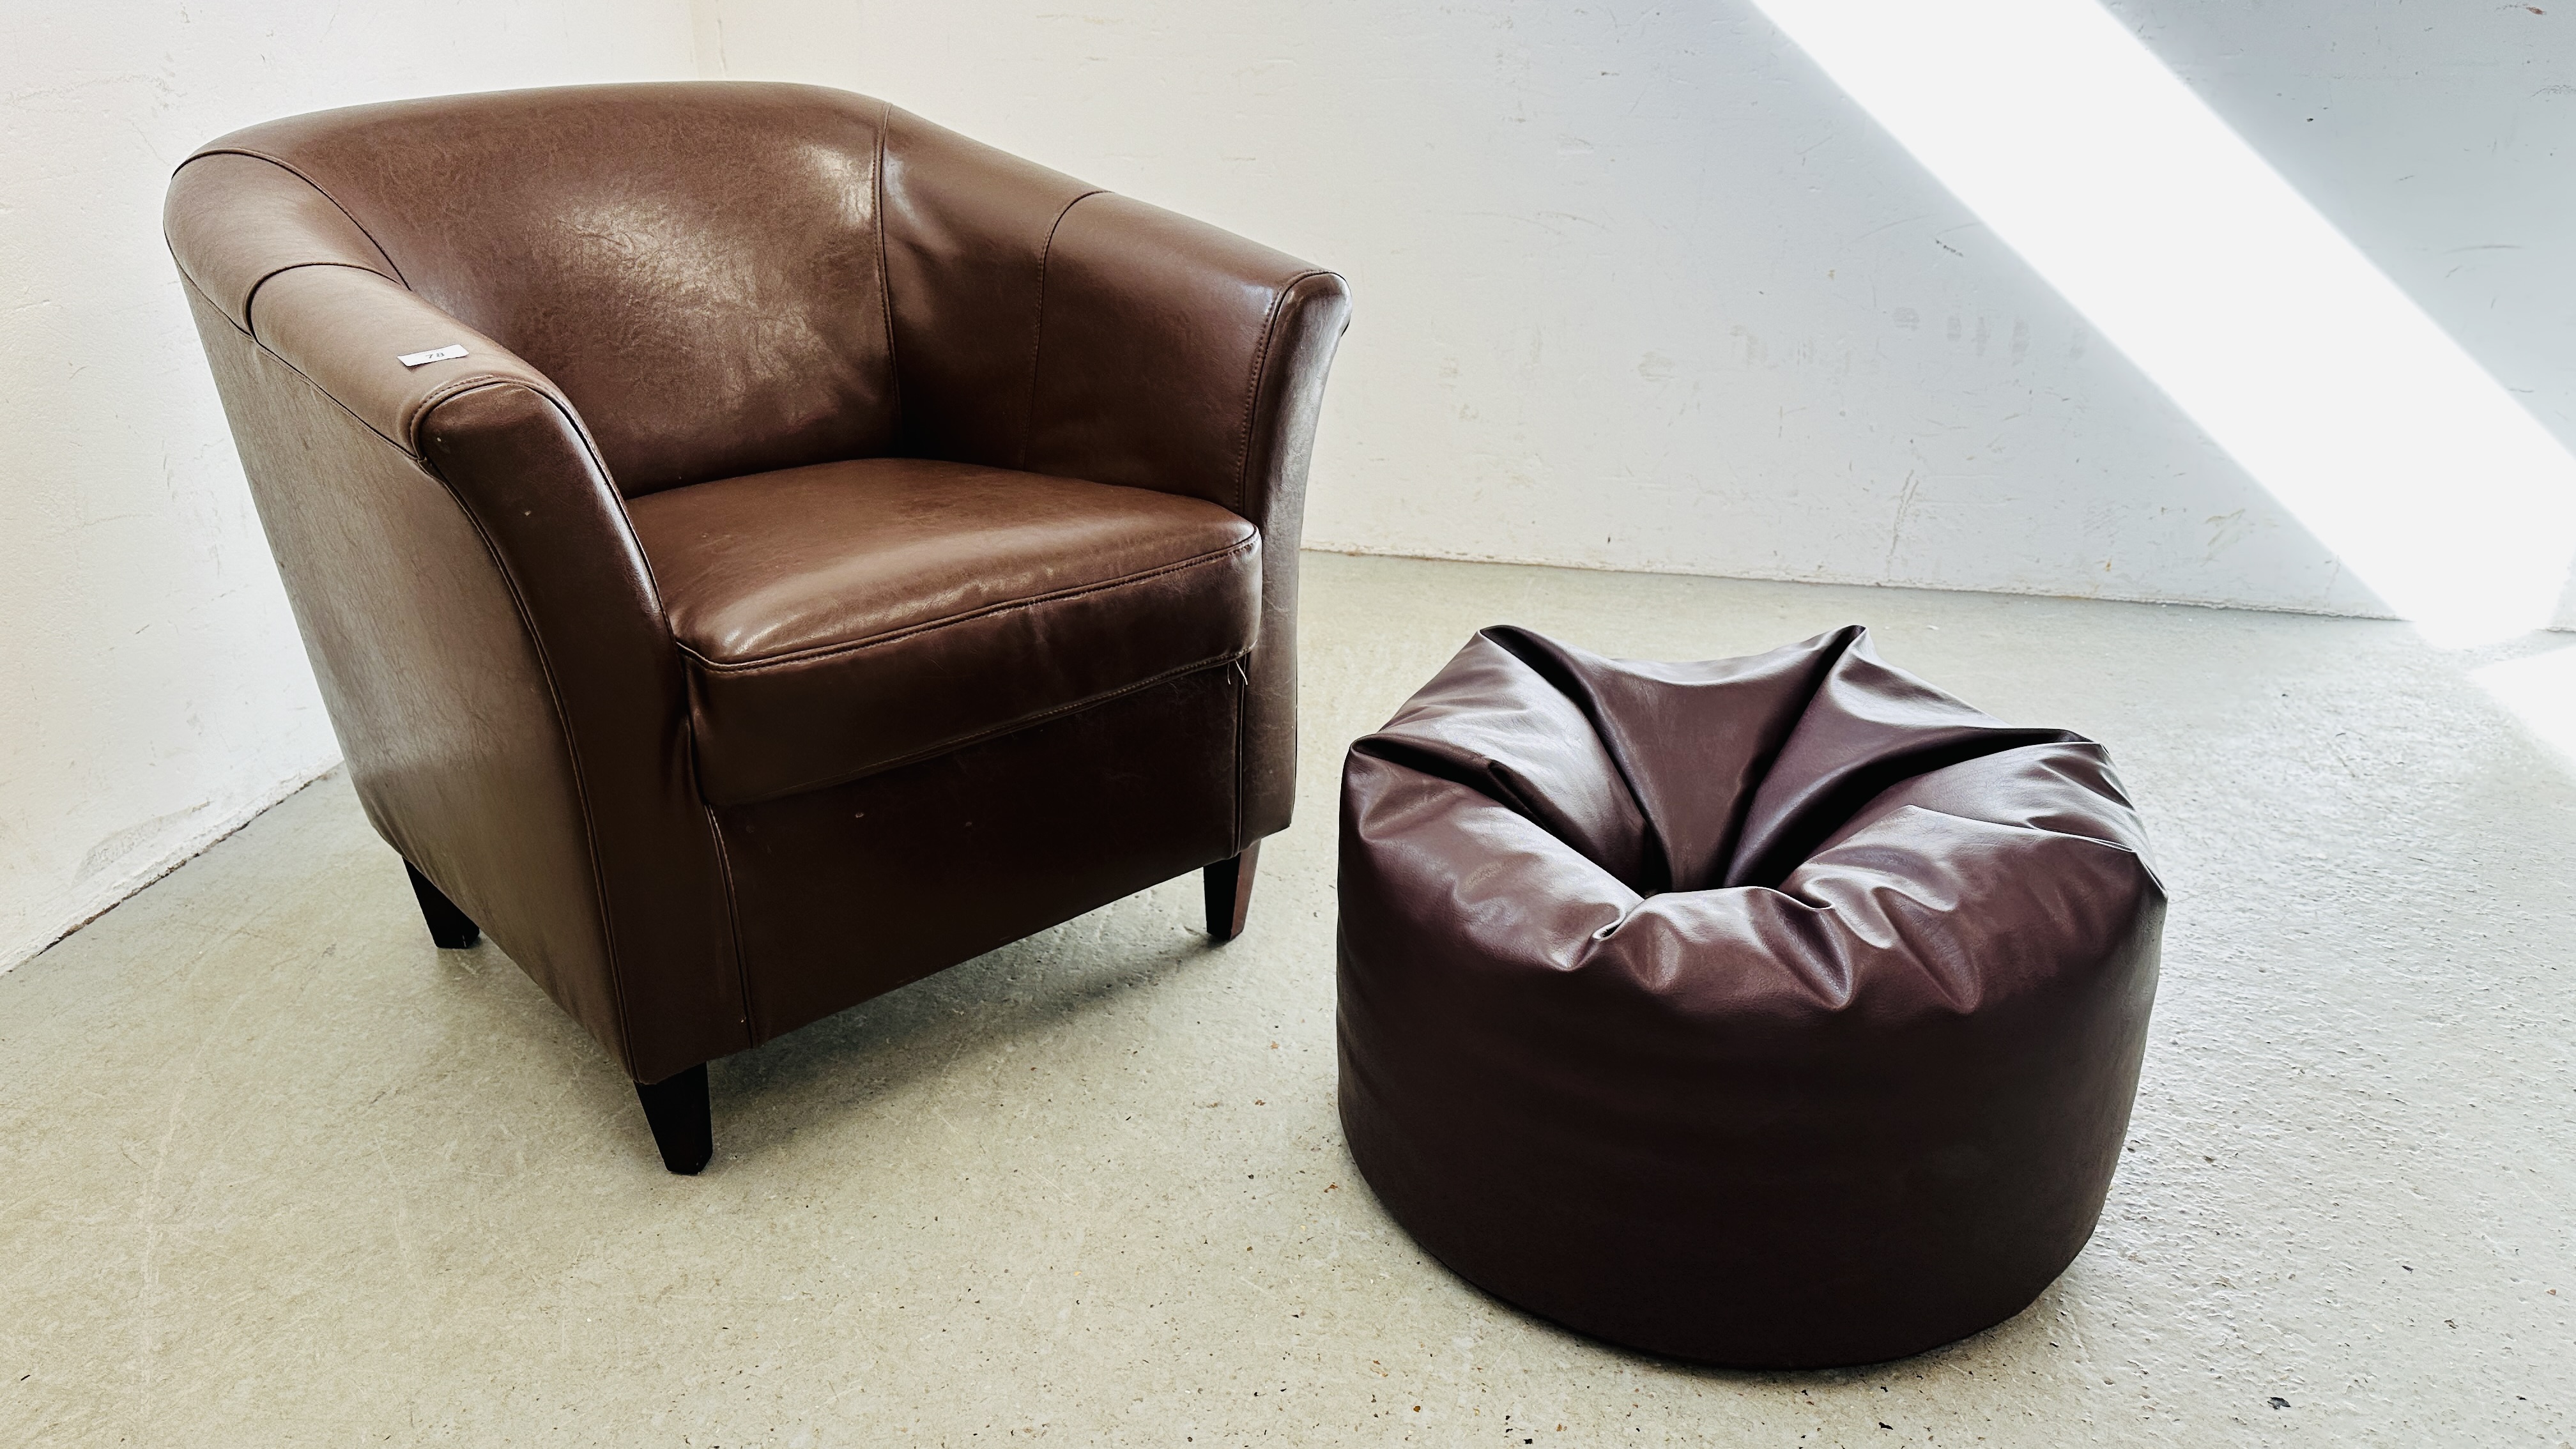 A MODERN BROWN FAUX LEATHER TUB CHAIR ALONG WITH MATCHING BEAN BAG FOOT REST.